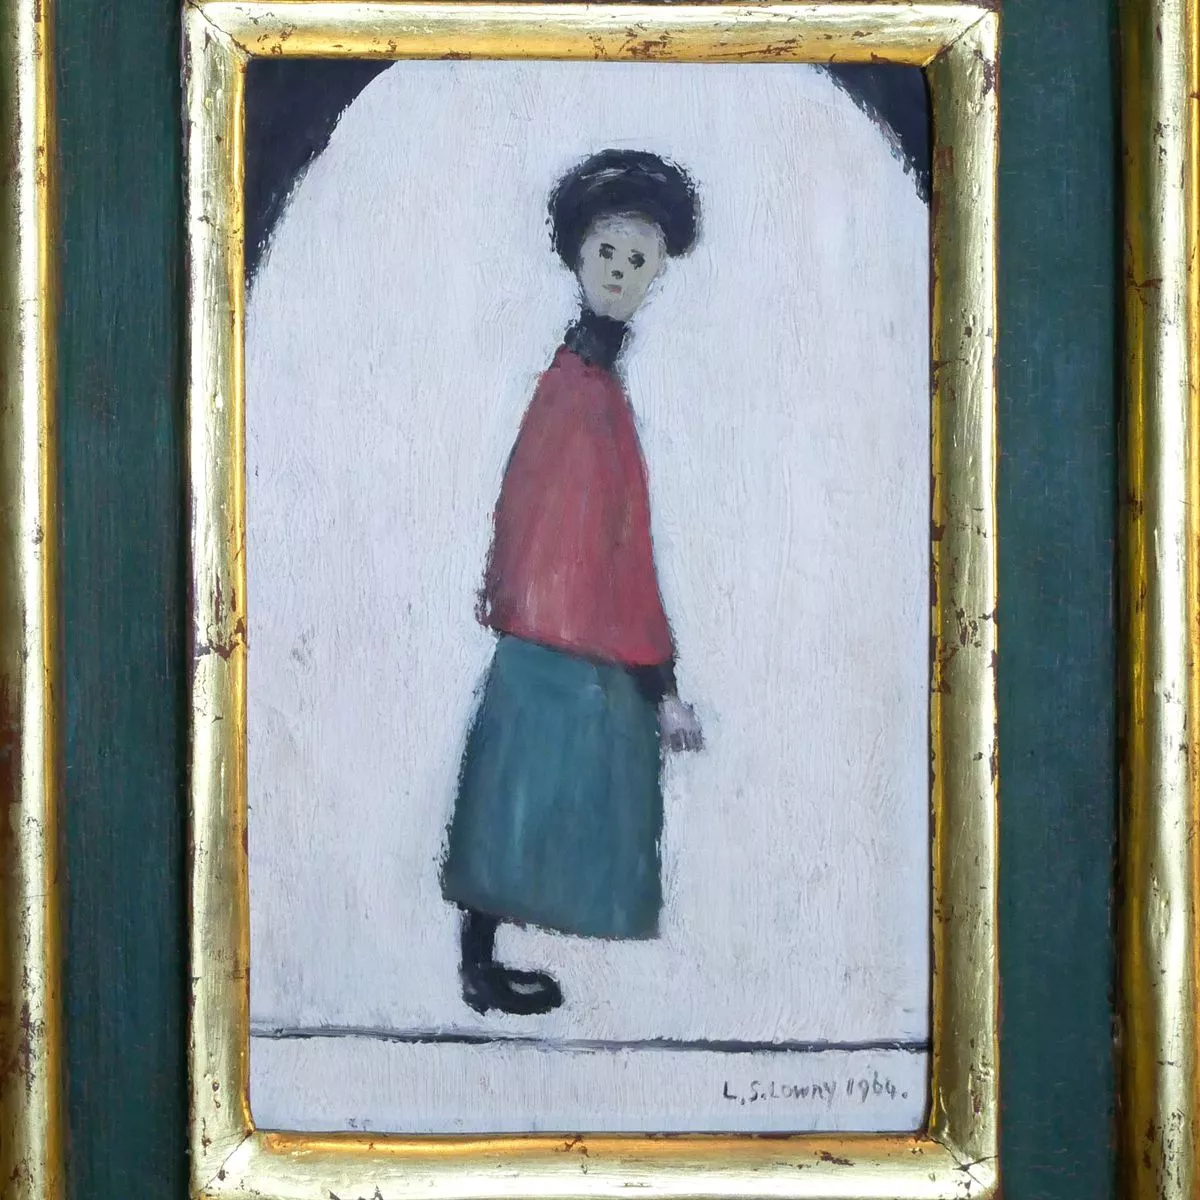 The Lady in Waiting: Lost LS Lowry Painting Found After Years